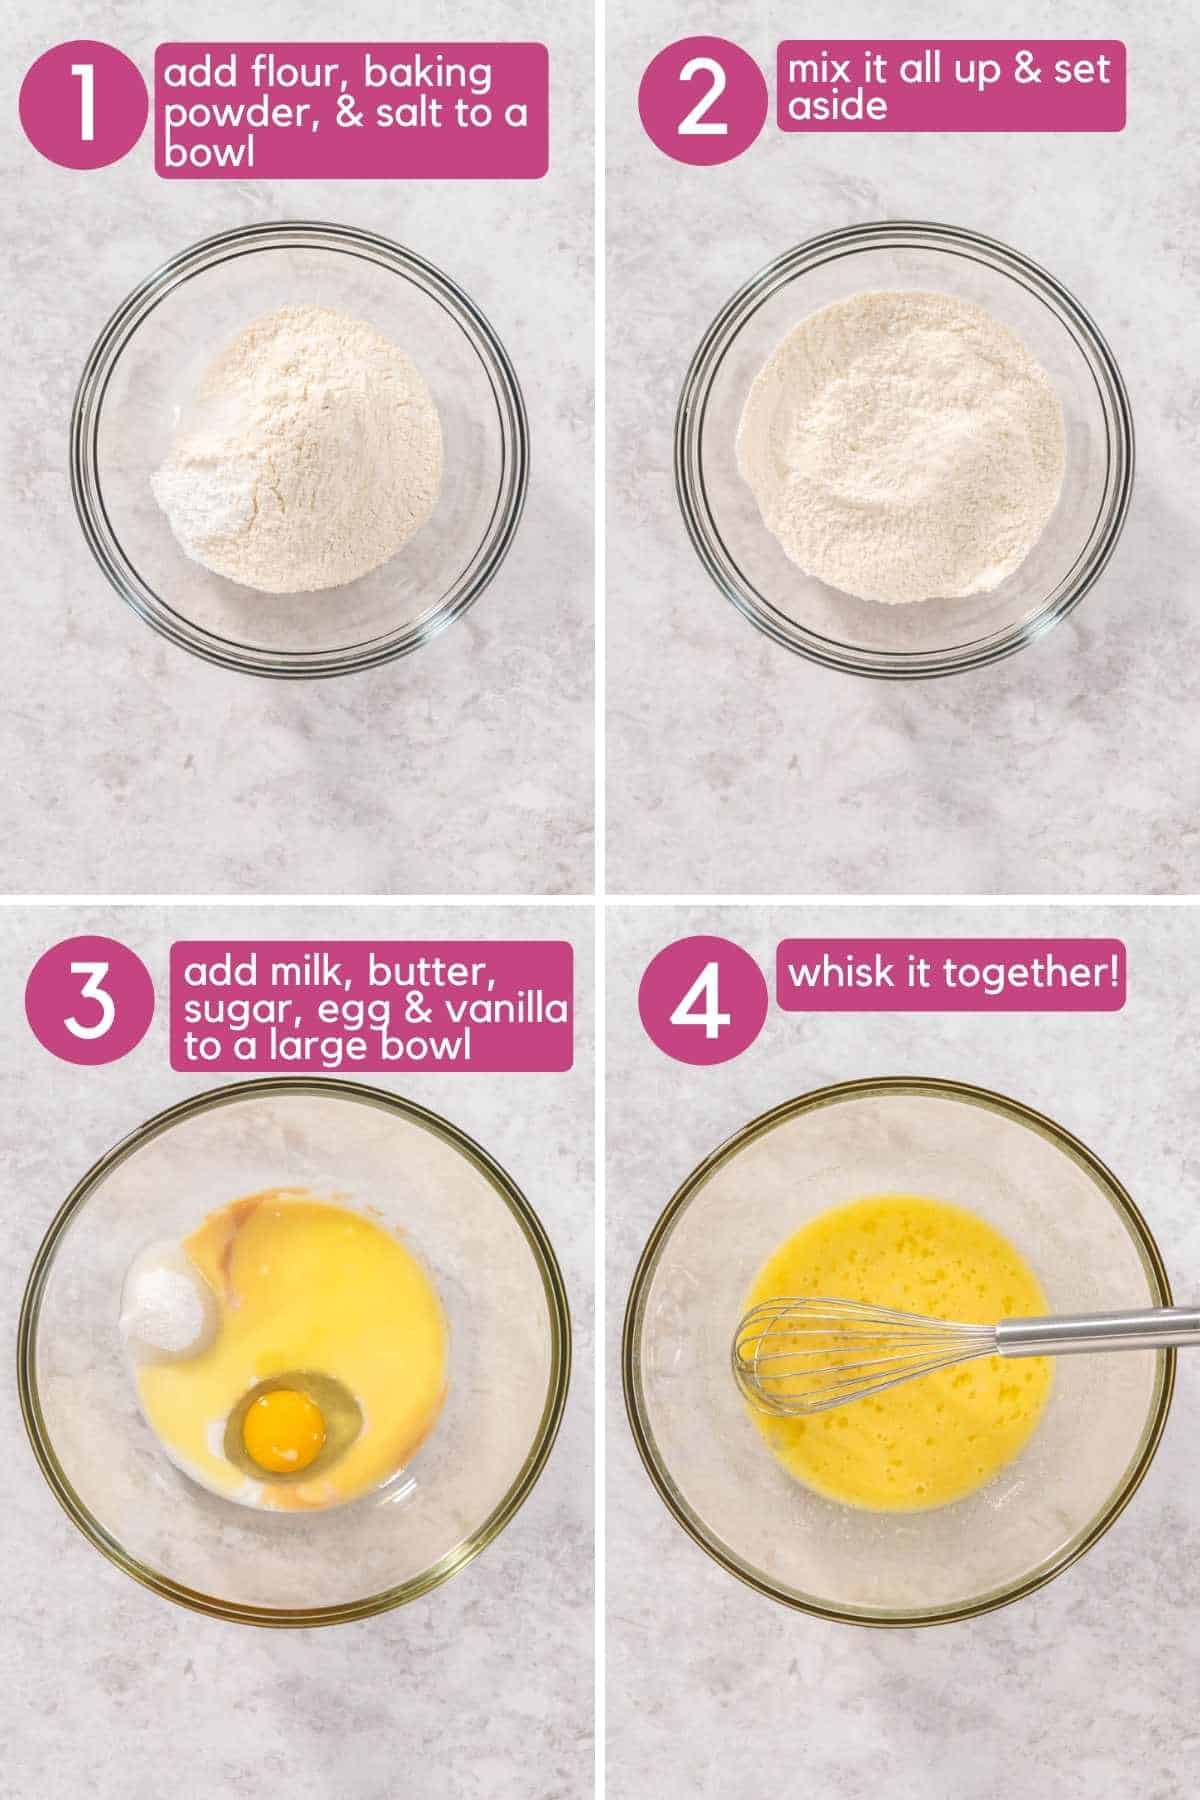 How To Make Air Fryer Muffin Batter.